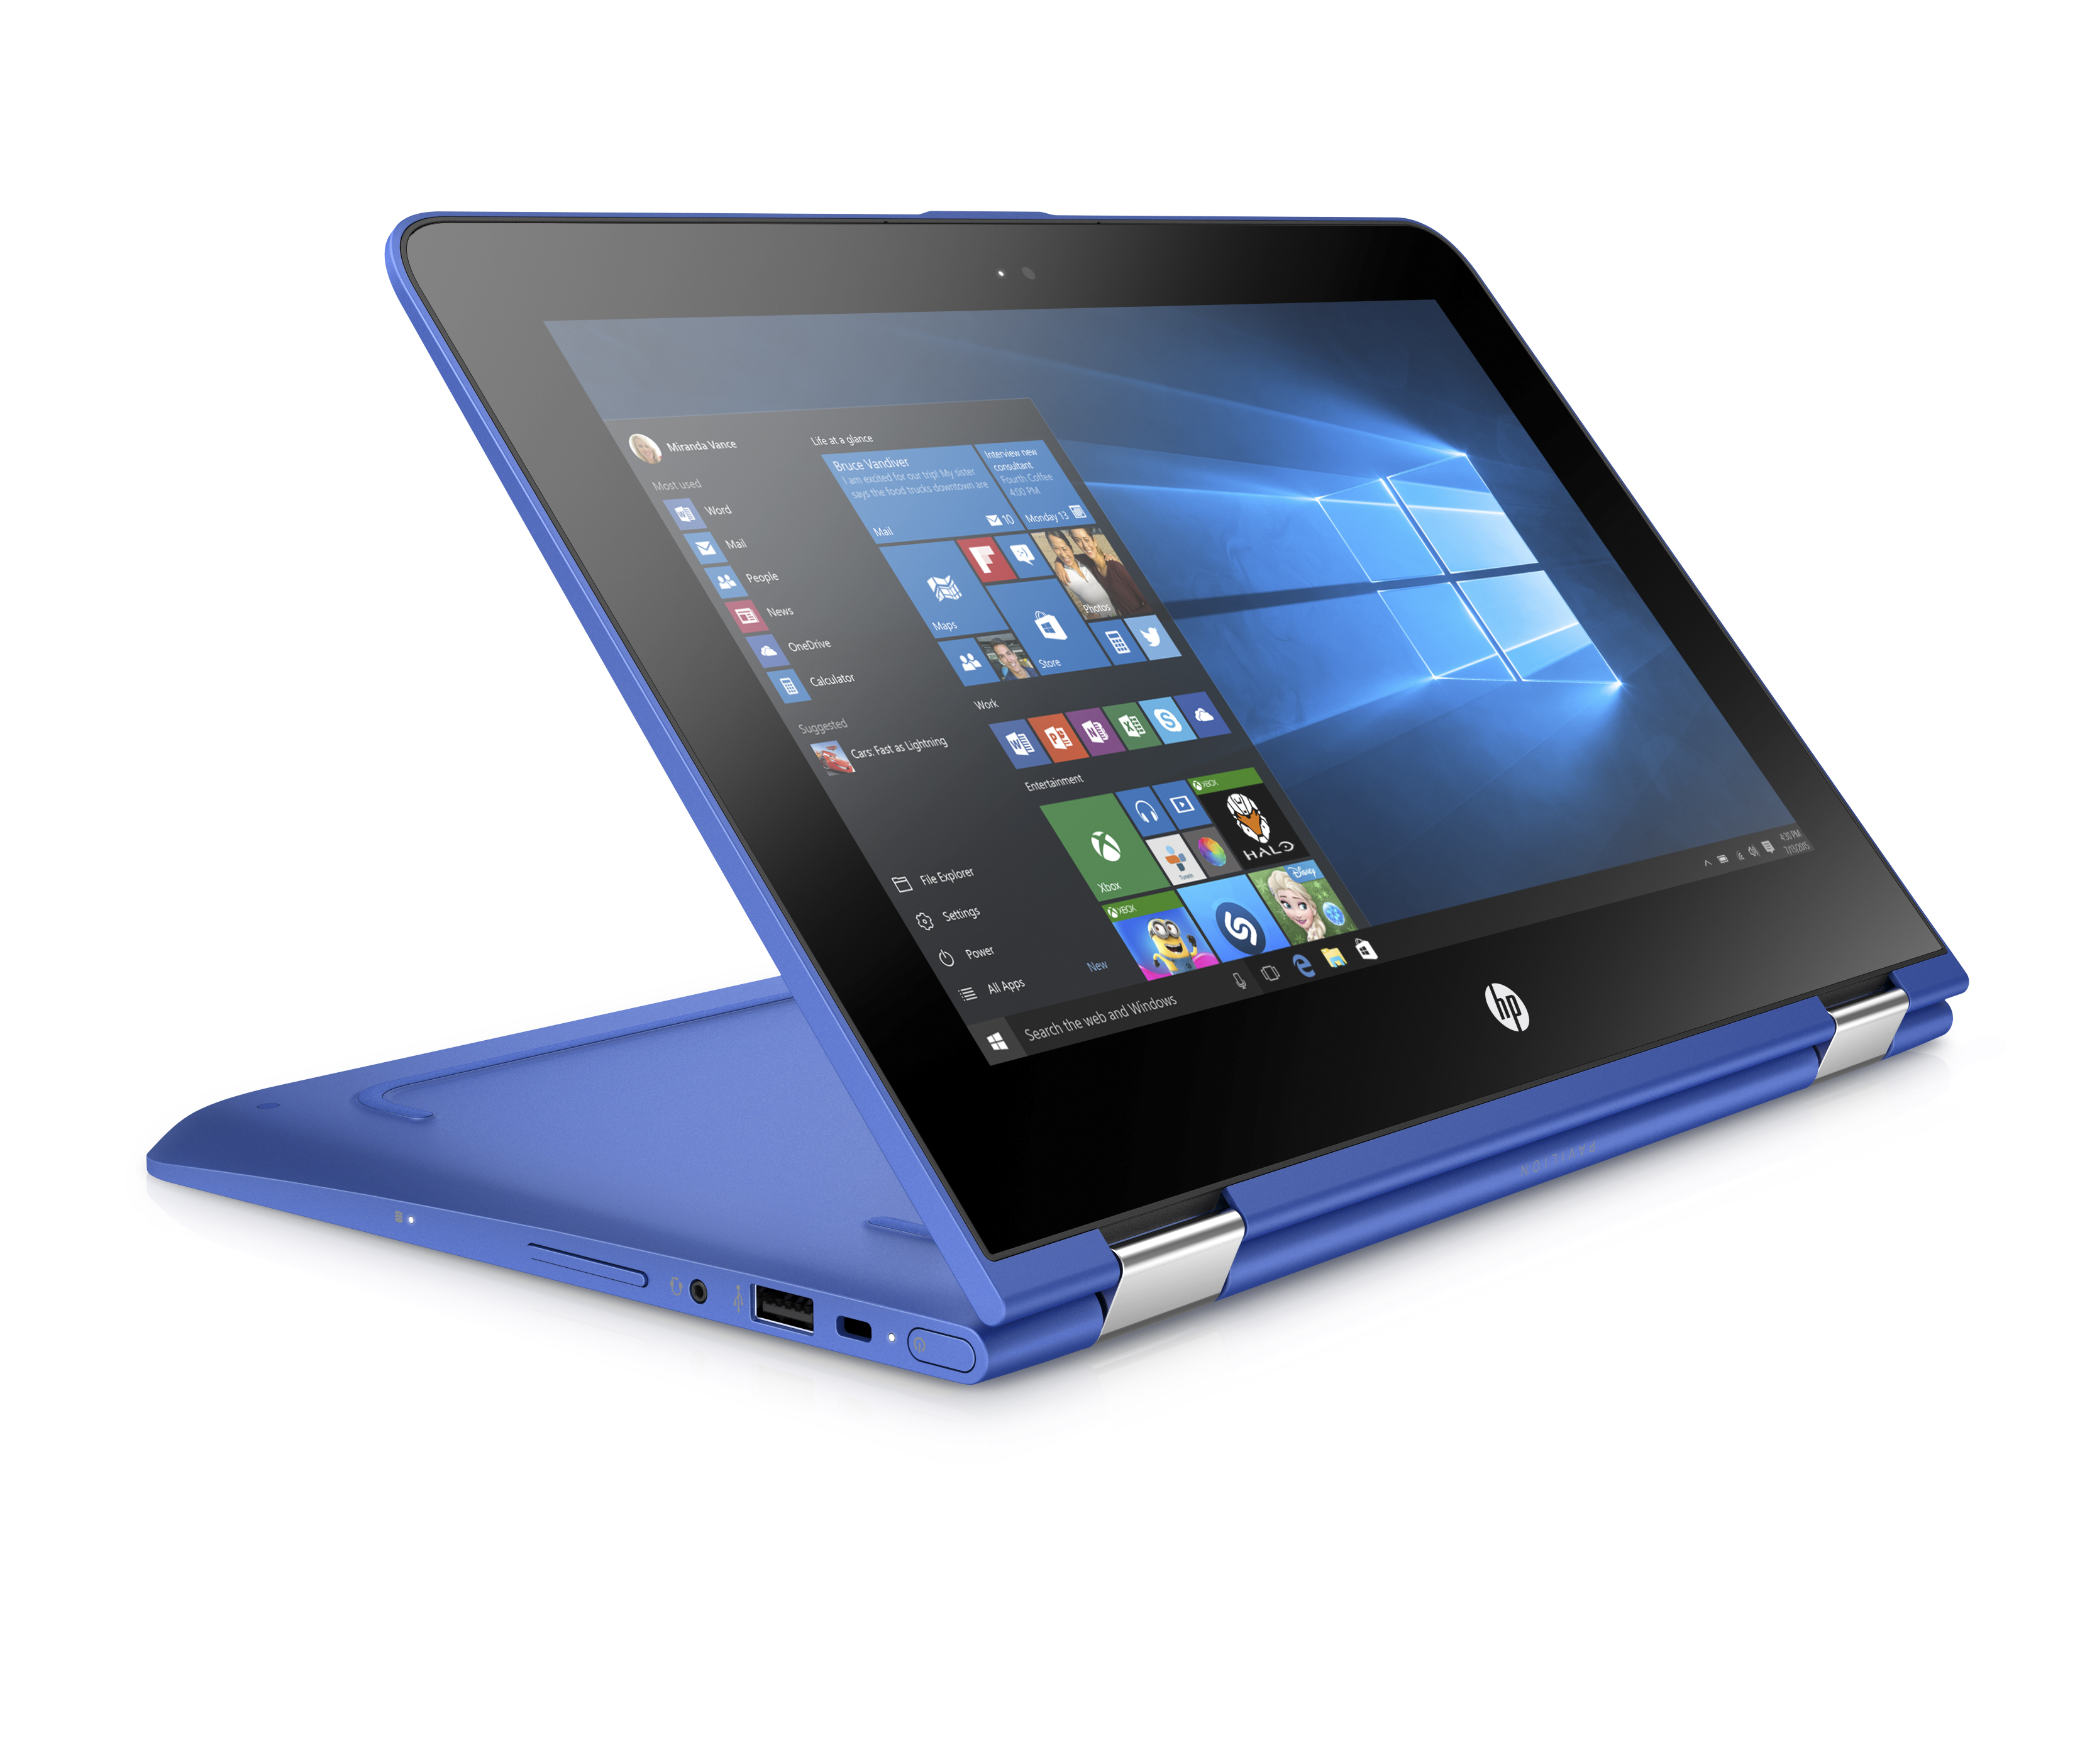 The HP Pavilion x360 with Windows 10